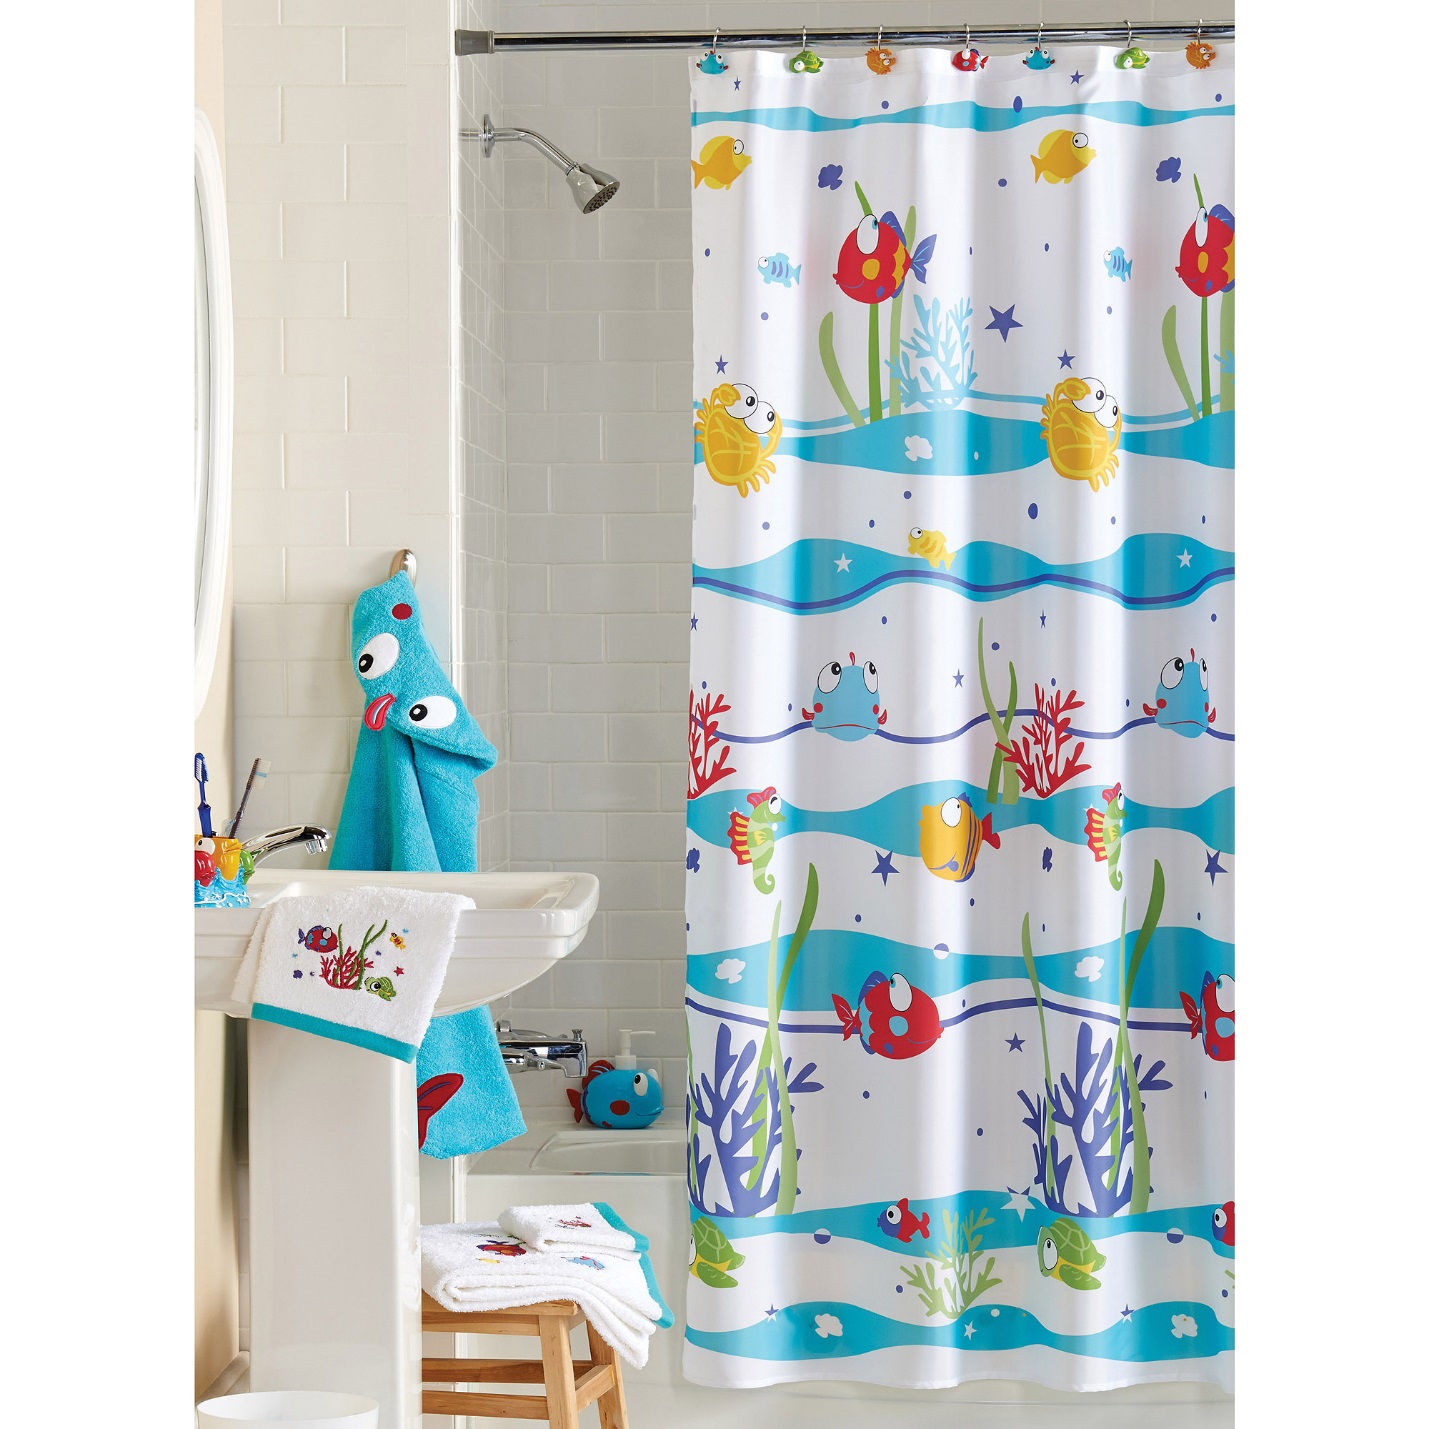 Fun patterns or prints in shower curtains